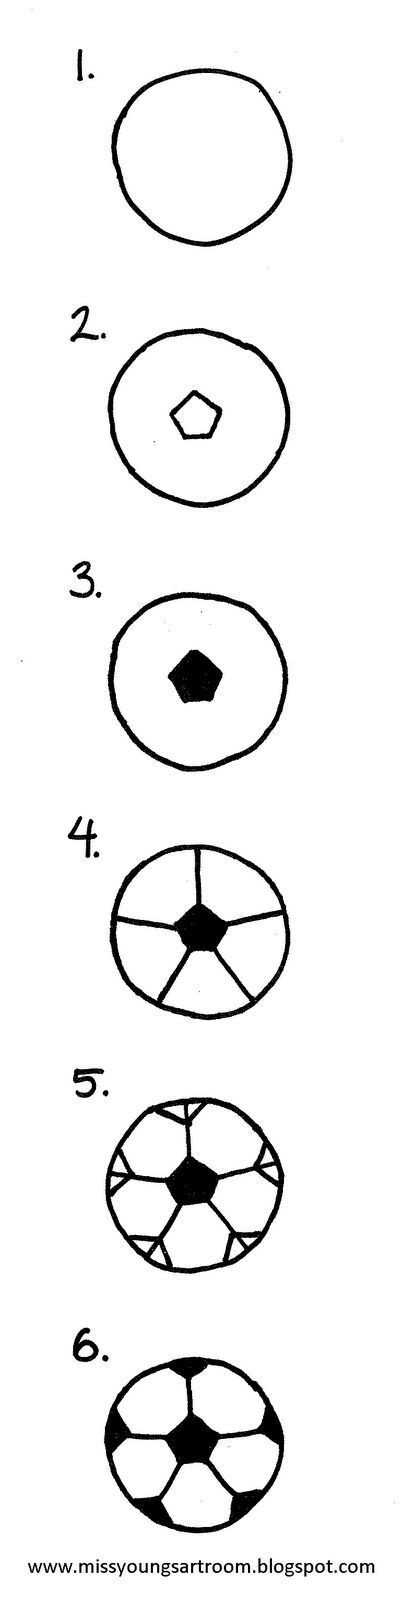 Miss Young's Art Room: How To Draw A Soccer Ball